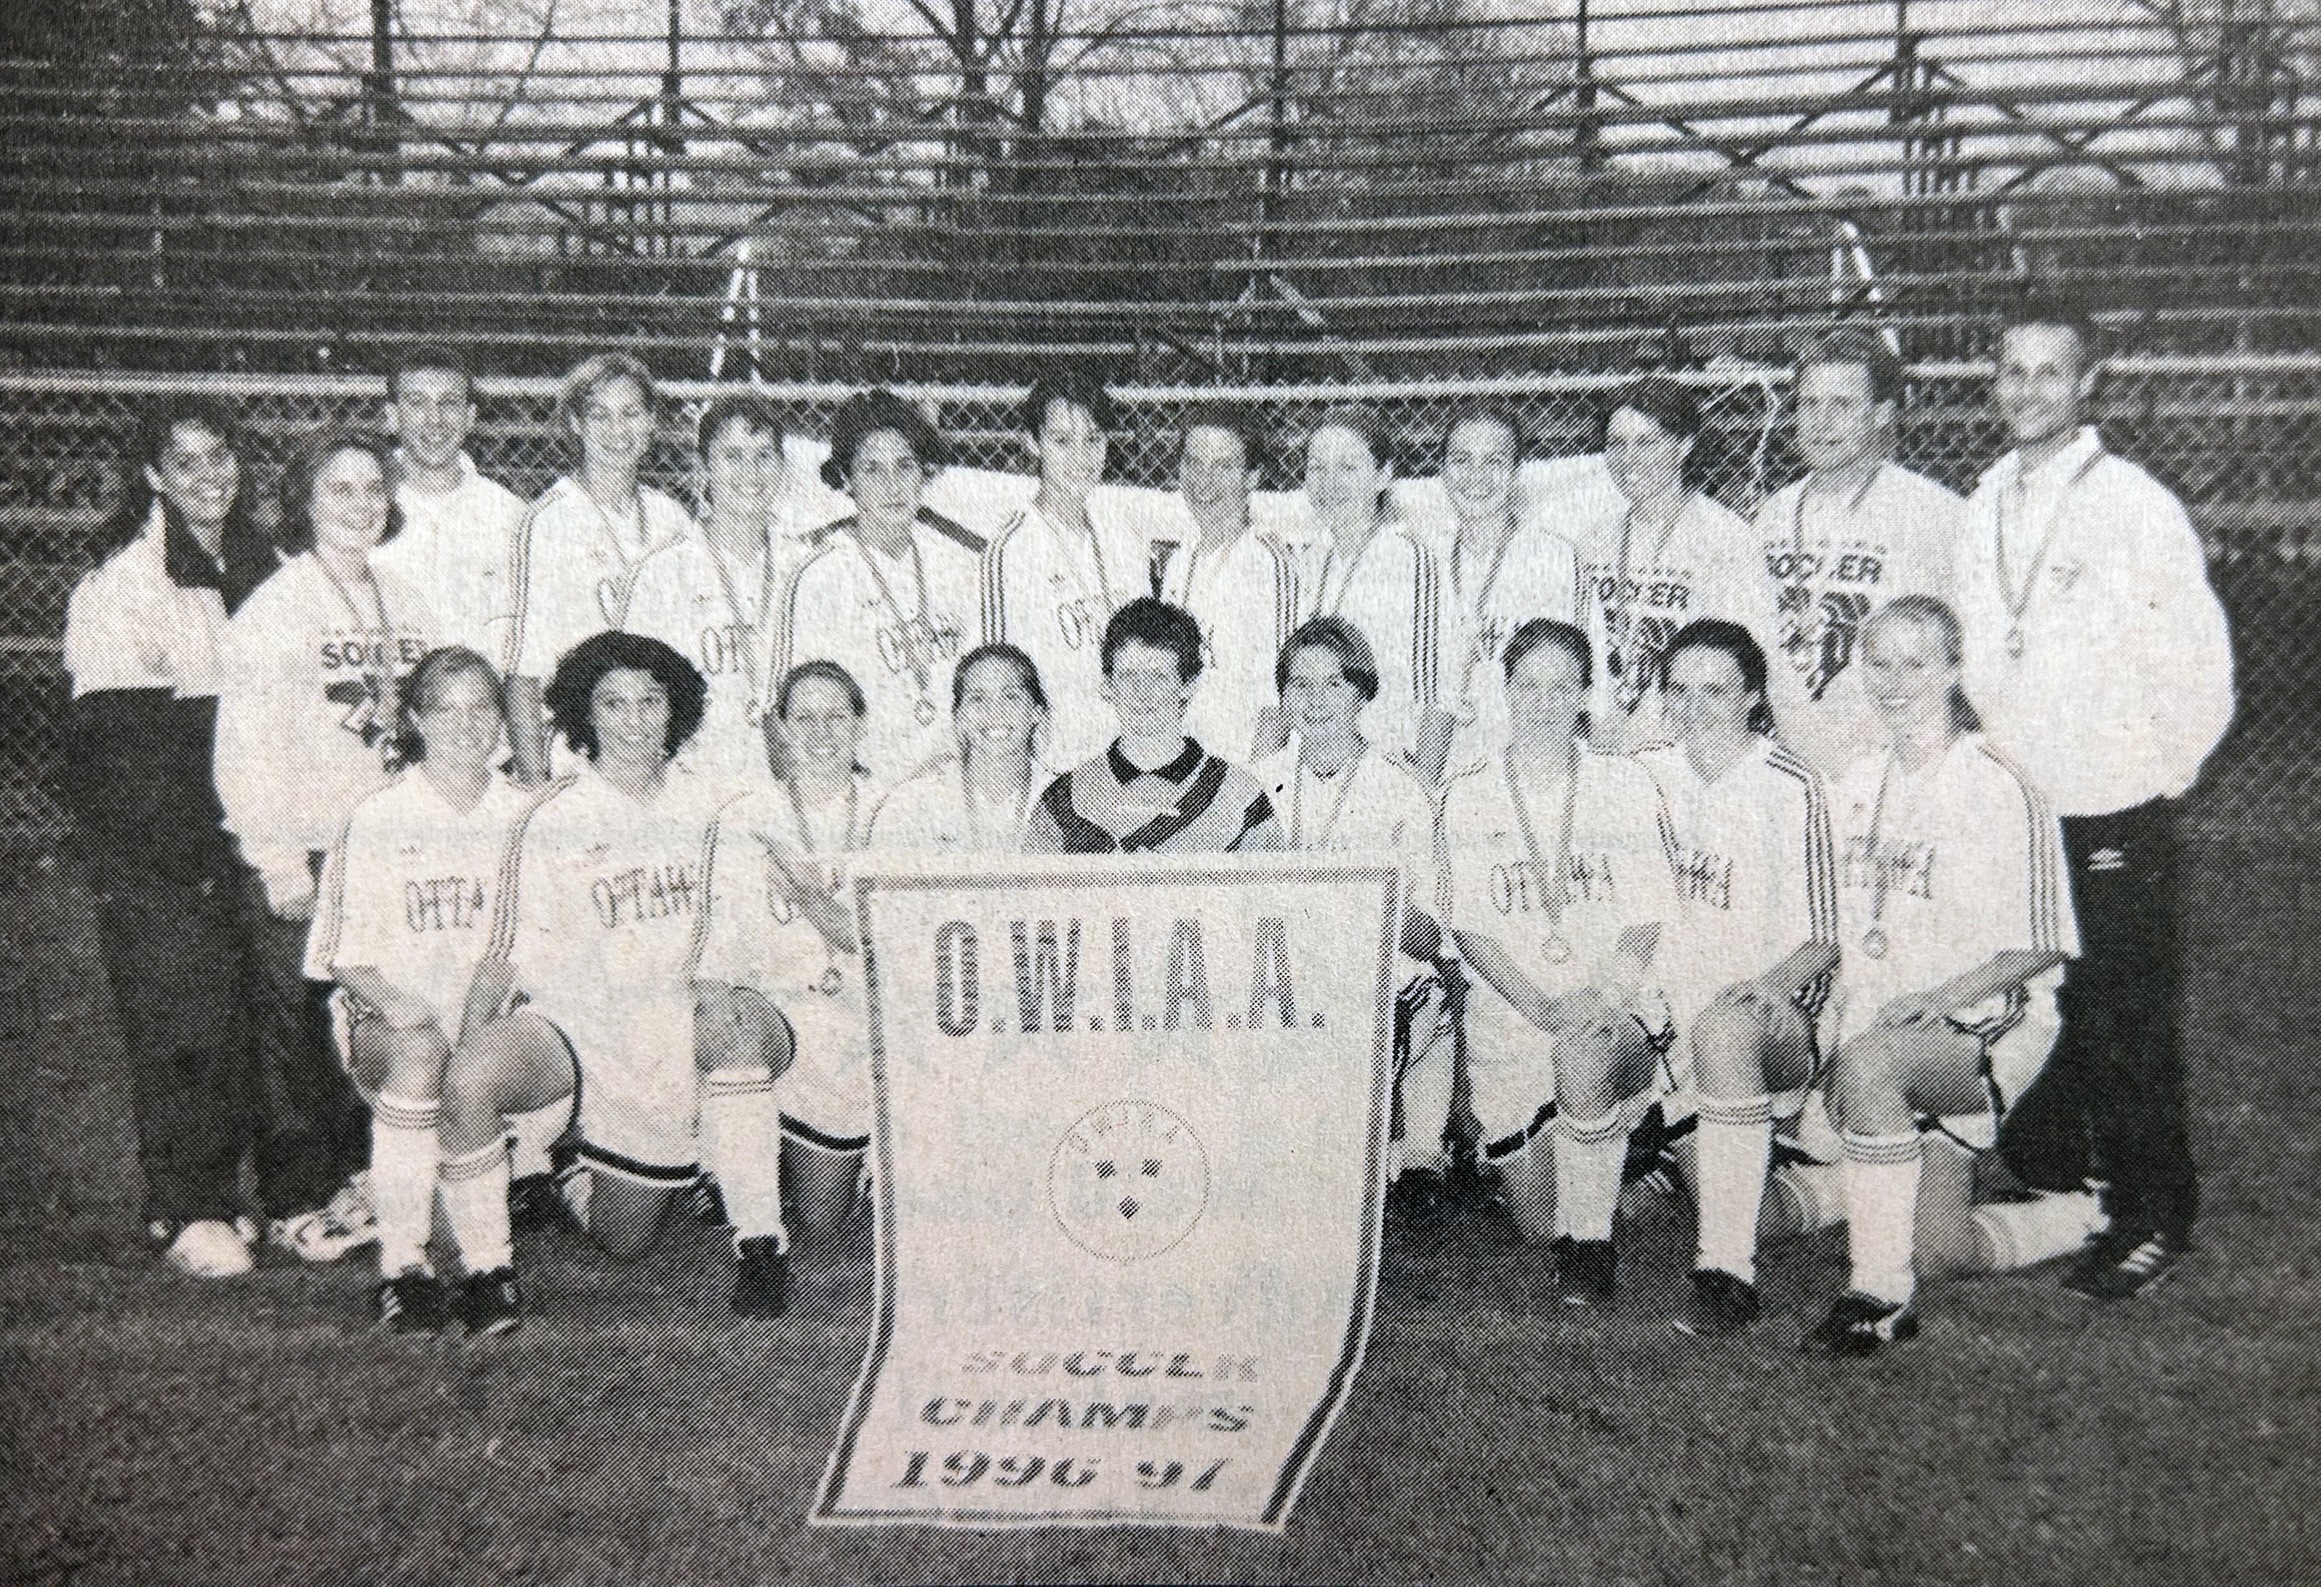 Black and white newspaper clipping of a the Gee-Gees women's soccer team with the OWIAA championship banner and their medals for 1996.